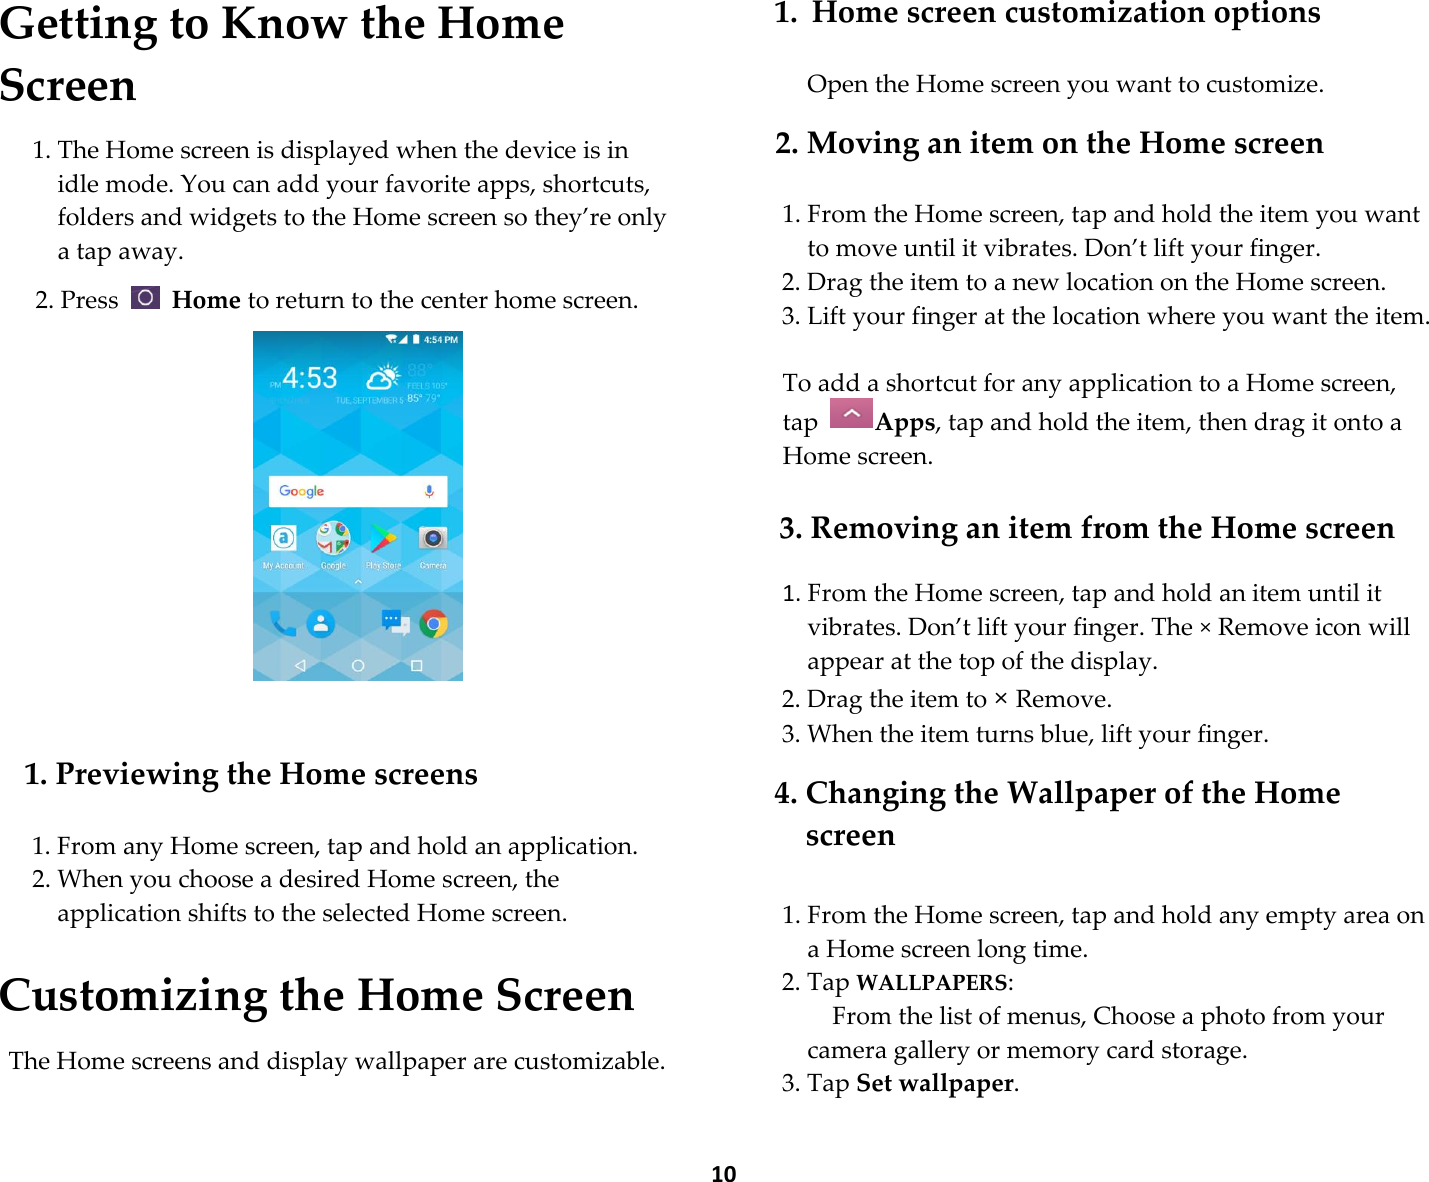  10 Getting to Know the Home Screen  1. The Home screen is displayed when the device is in idle mode. You can add your favorite apps, shortcuts, folders and widgets to the Home screen so they’re only a tap away.  2. Press    Home to return to the center home screen.         1. Previewing the Home screens  1. From any Home screen, tap and hold an application. 2. When you choose a desired Home screen, the application shifts to the selected Home screen.  Customizing the Home Screen  The Home screens and display wallpaper are customizable.  1. Home screen customization options  Open the Home screen you want to customize.  2. Moving an item on the Home screen  1. From the Home screen, tap and hold the item you want to move until it vibrates. Don’t lift your finger. 2. Drag the item to a new location on the Home screen. 3. Lift your finger at the location where you want the item.  To add a shortcut for any application to a Home screen, tap  Apps, tap and hold the item, then drag it onto a Home screen.  3. Removing an item from the Home screen  1. From the Home screen, tap and hold an item until it vibrates. Don’t lift your finger. The × Remove icon will appear at the top of the display. 2. Drag the item to × Remove. 3. When the item turns blue, lift your finger.  4. Changing the Wallpaper of the Home screen  1. From the Home screen, tap and hold any empty area on a Home screen long time. 2. Tap WALLPAPERS:     From the list of menus, Choose a photo from your camera gallery or memory card storage. 3. Tap Set wallpaper.